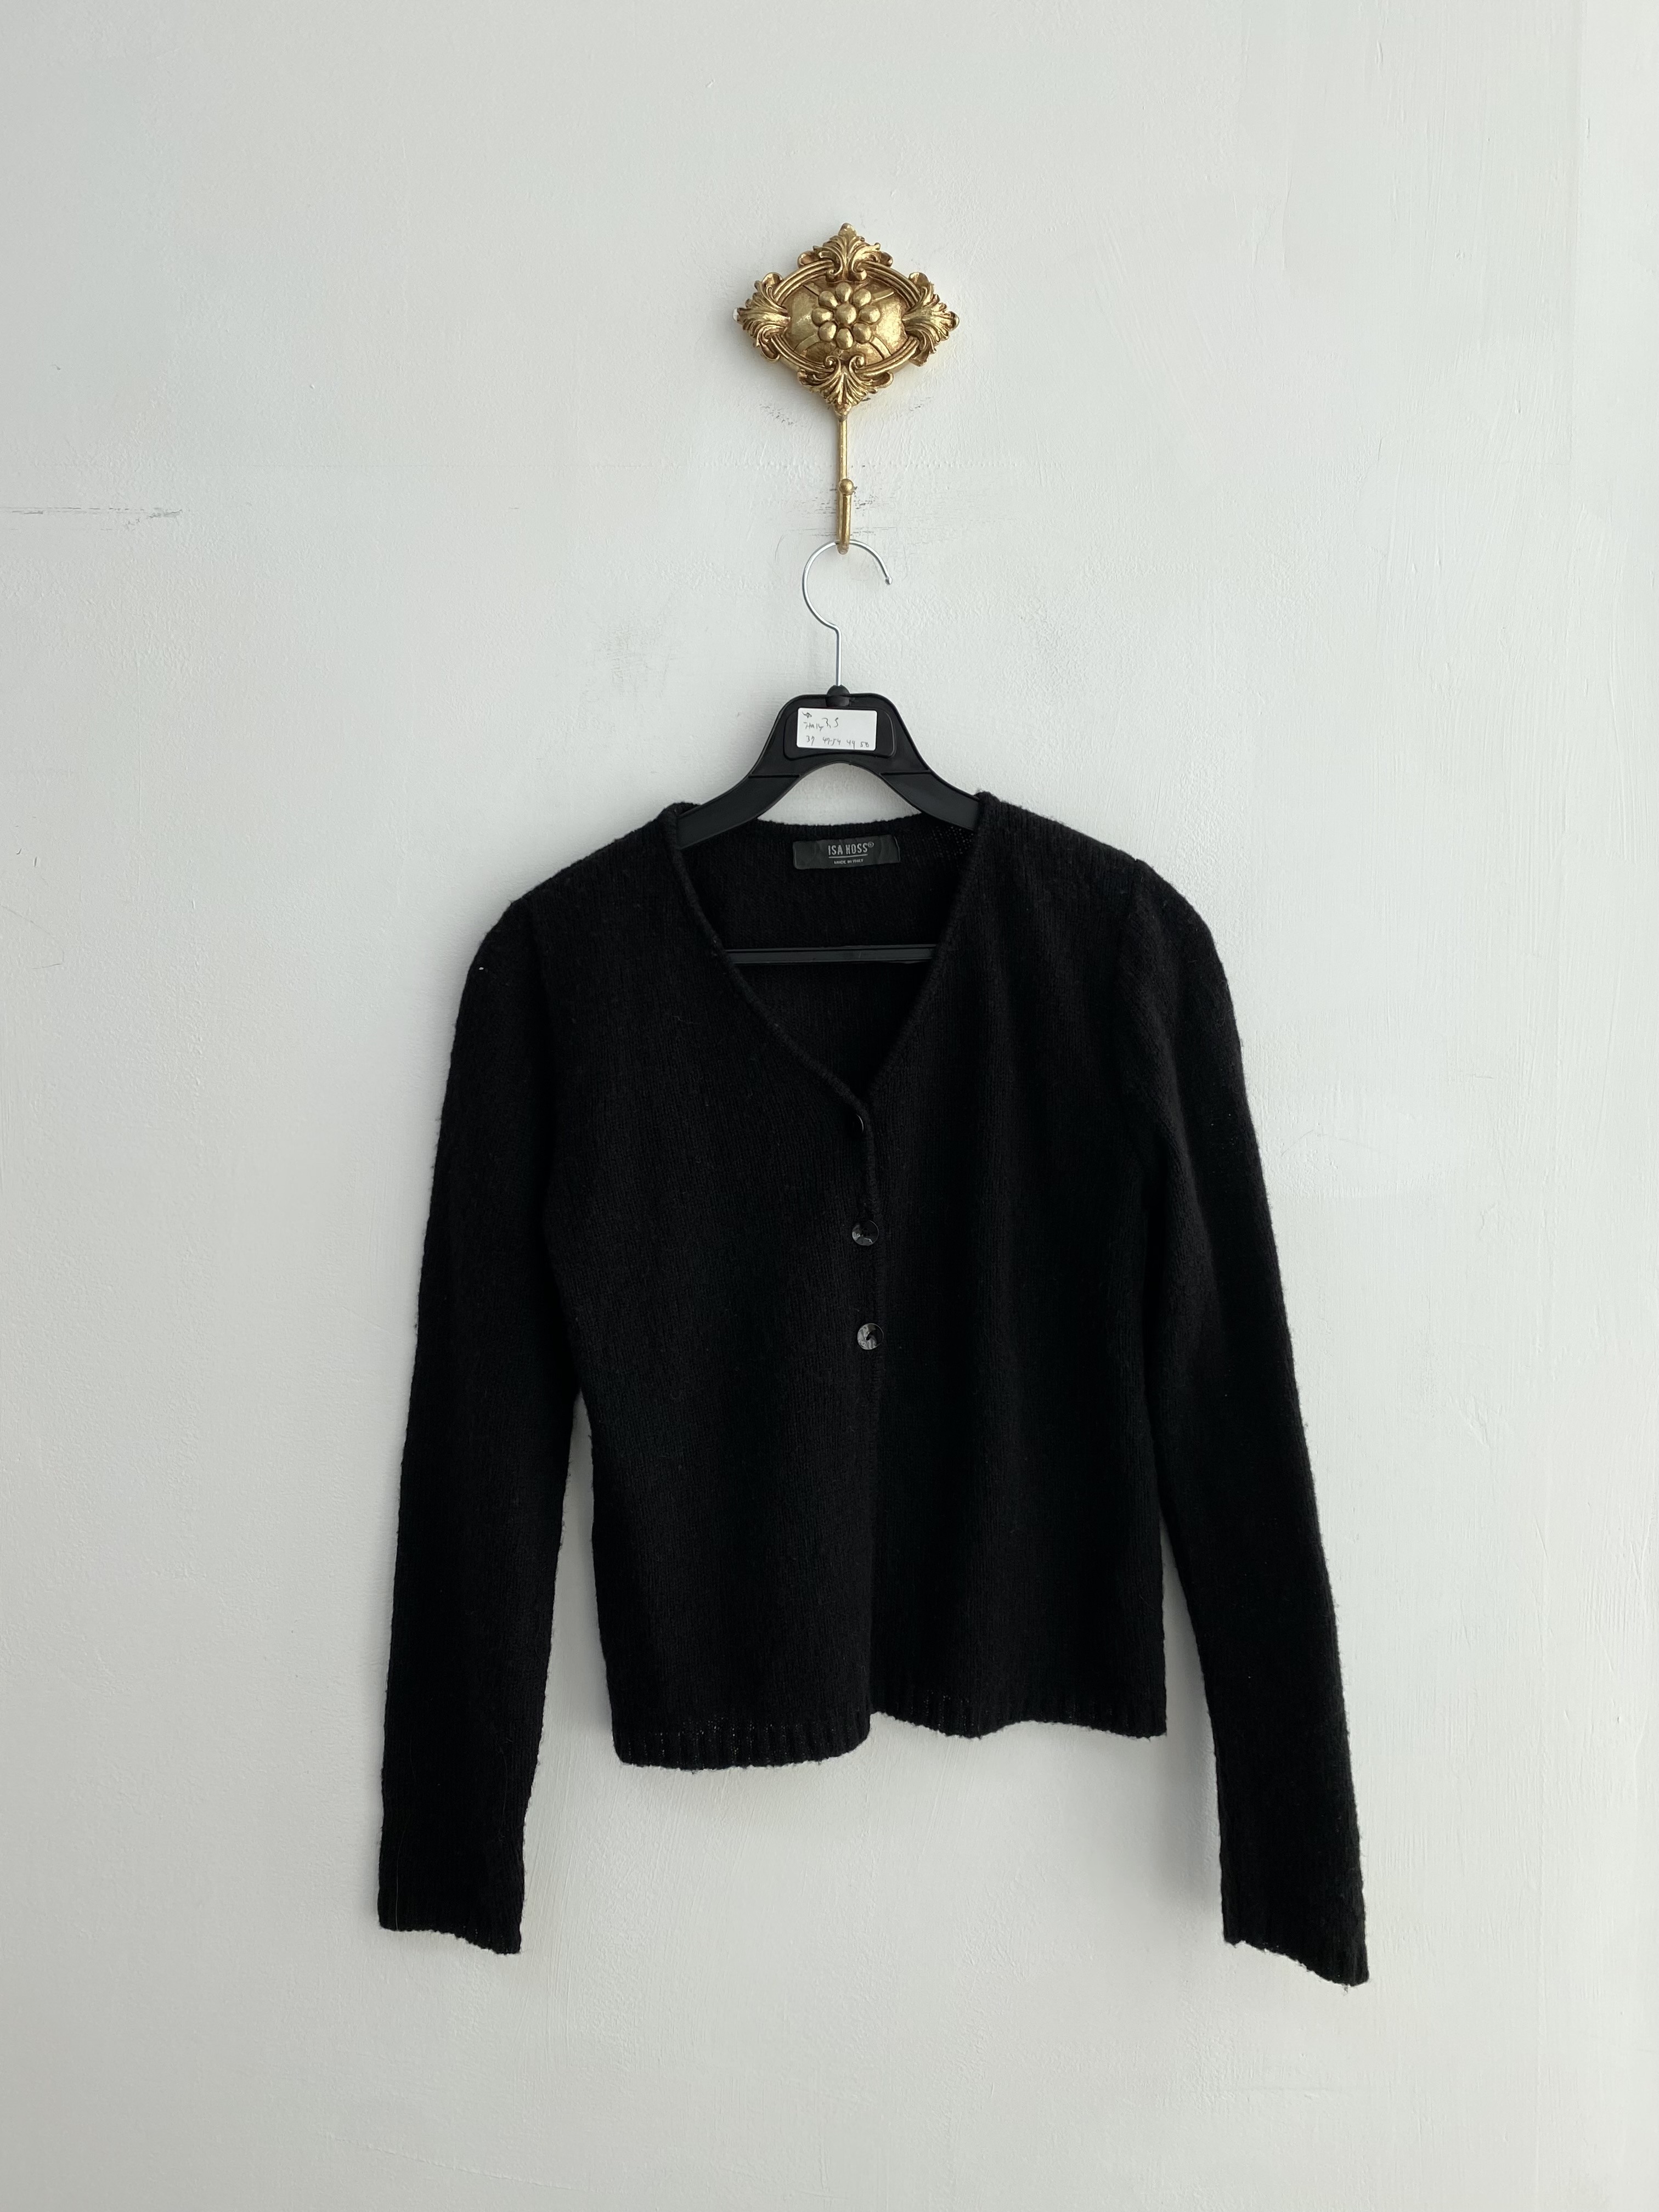 Black wool mix short knit cardigan (made in italy)